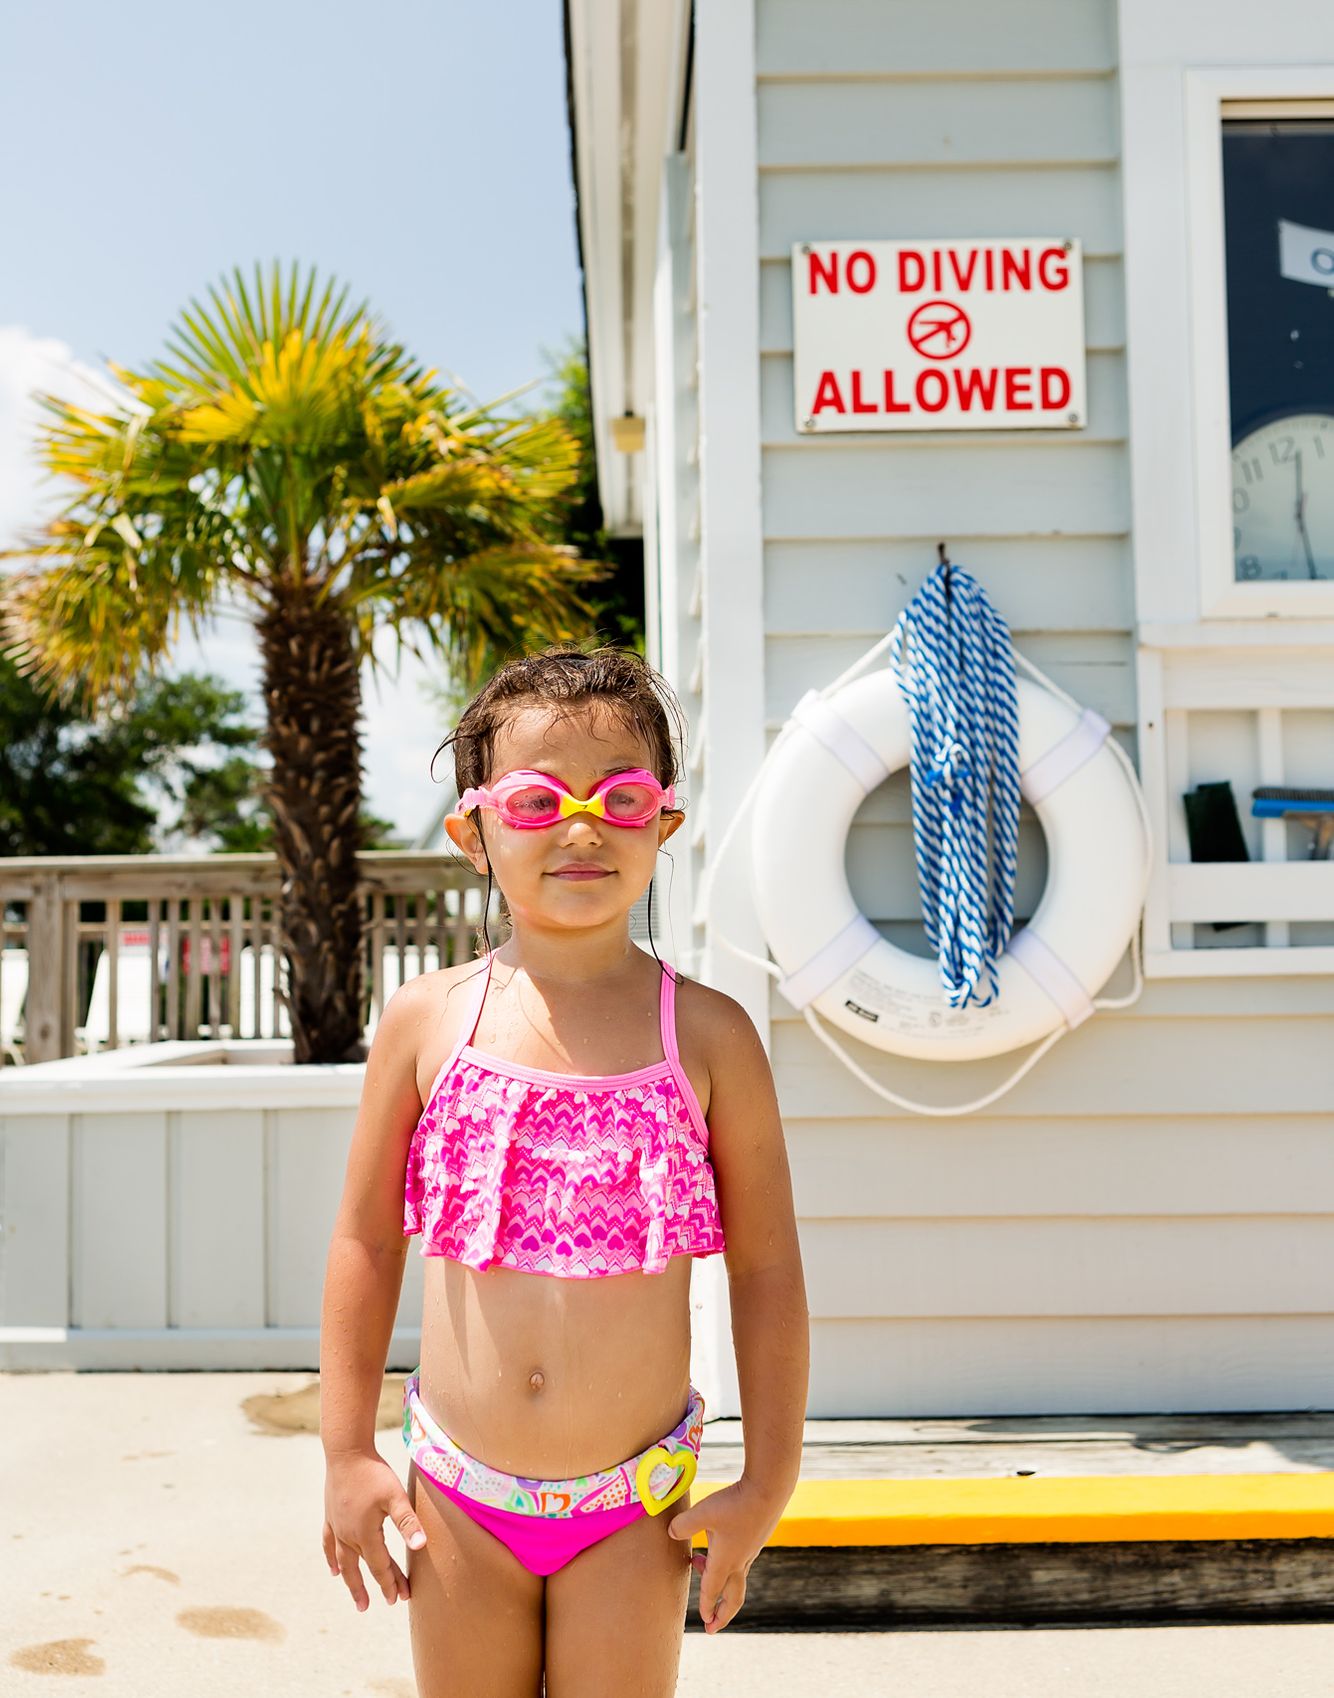 LifeStyle Image - Young Girl with Swim Goggles.jpg